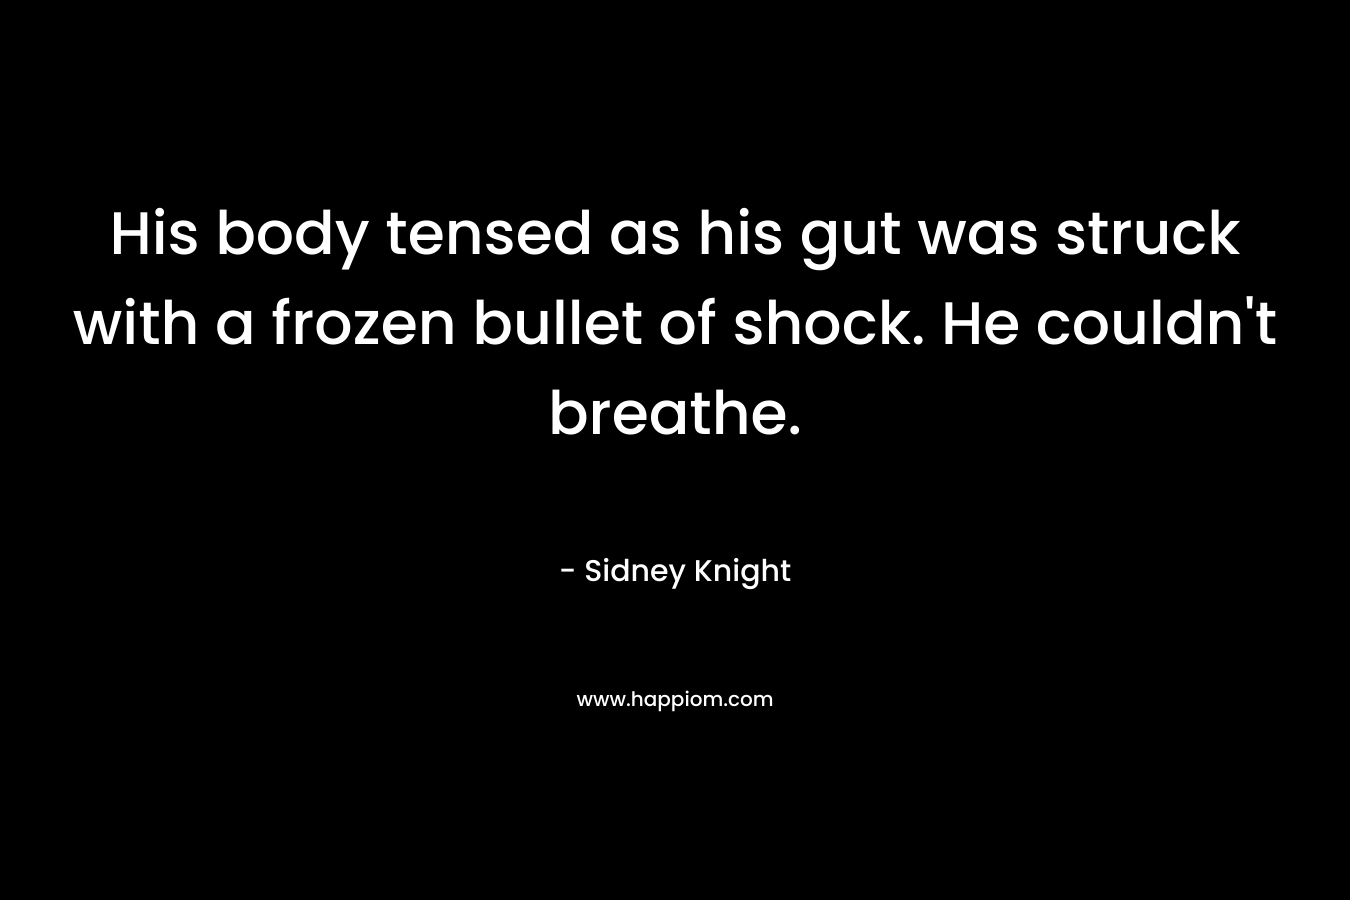 His body tensed as his gut was struck with a frozen bullet of shock. He couldn’t breathe. – Sidney Knight